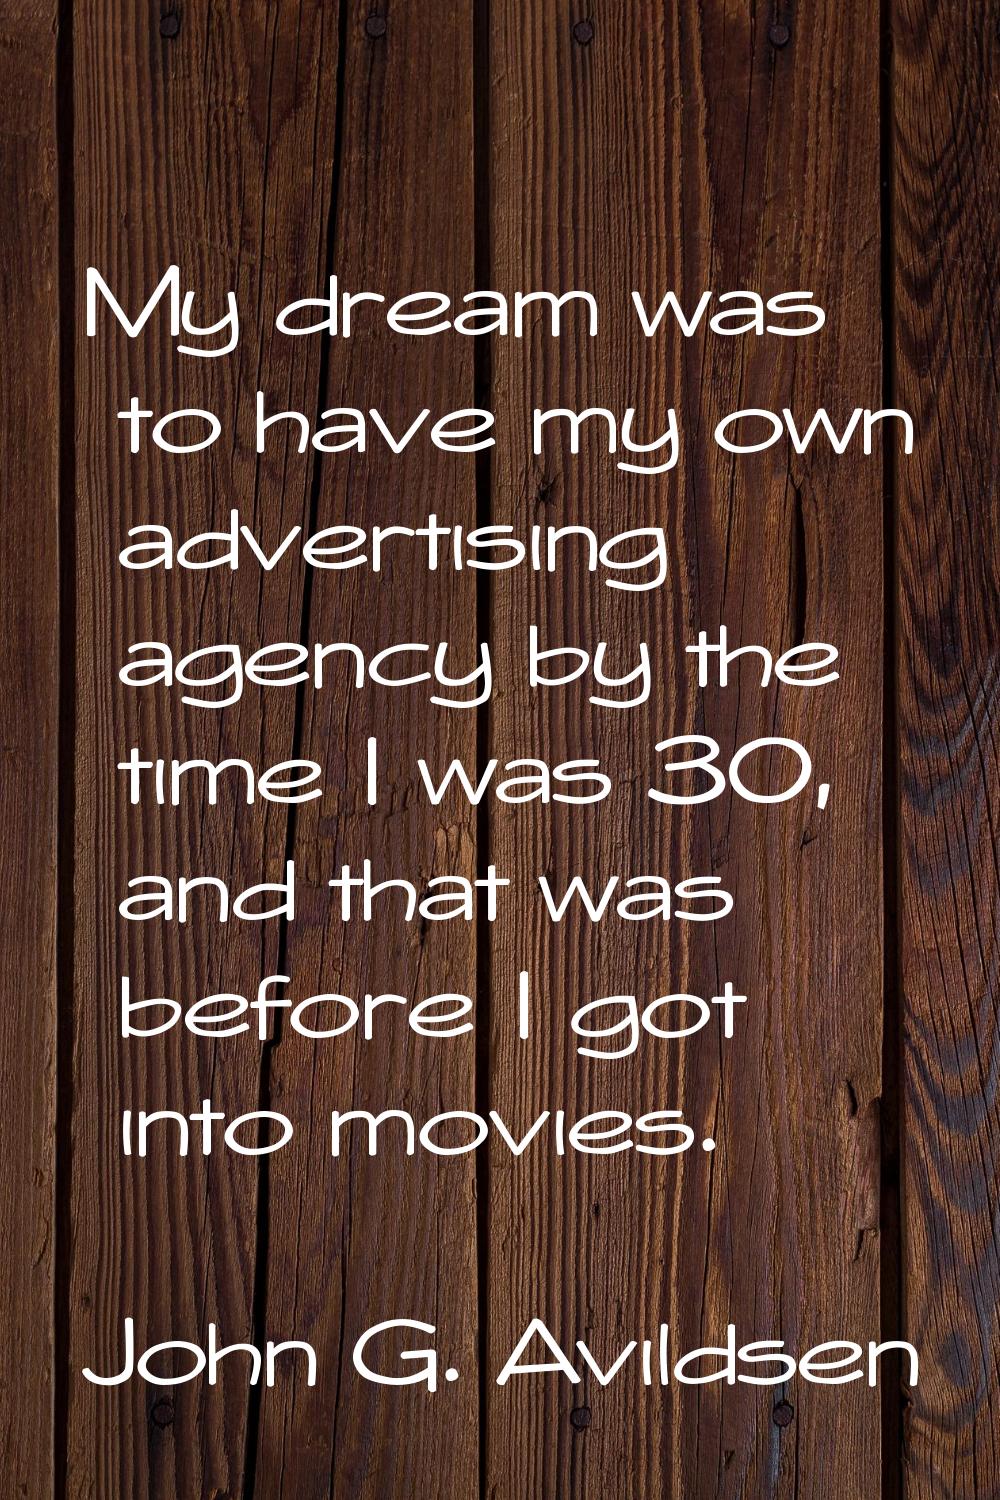 My dream was to have my own advertising agency by the time I was 30, and that was before I got into